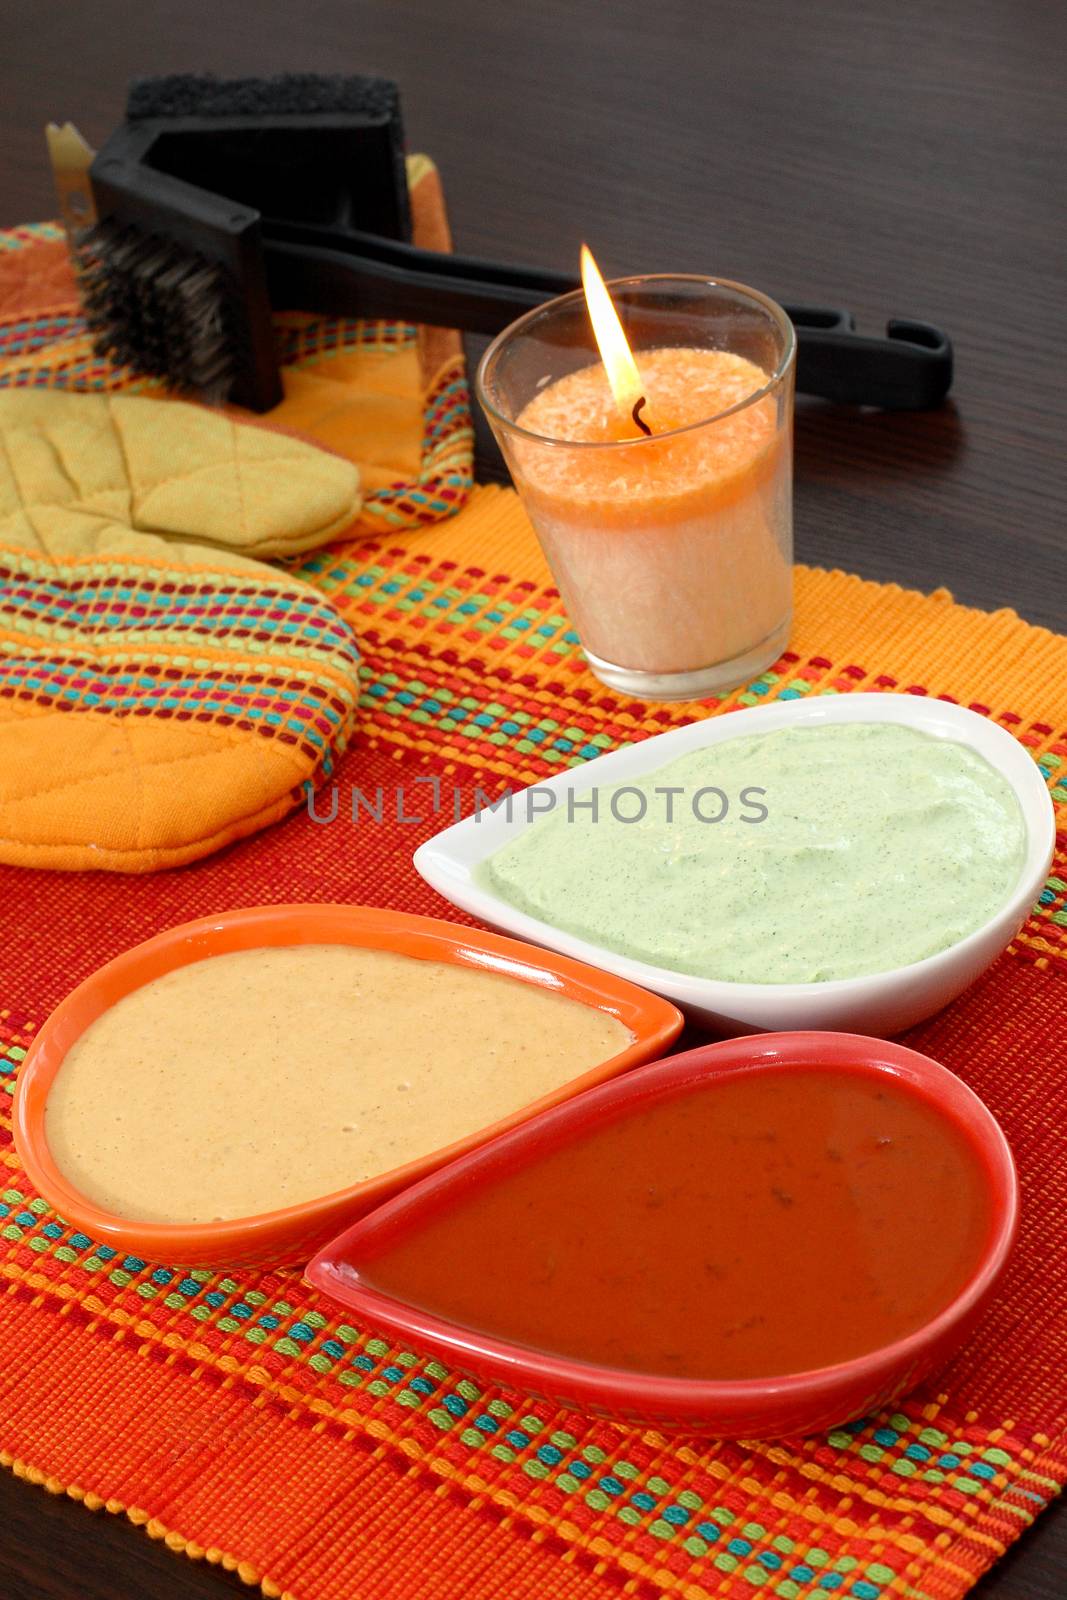 Three types of barbecue sauce, red, white, orange arranged on the table